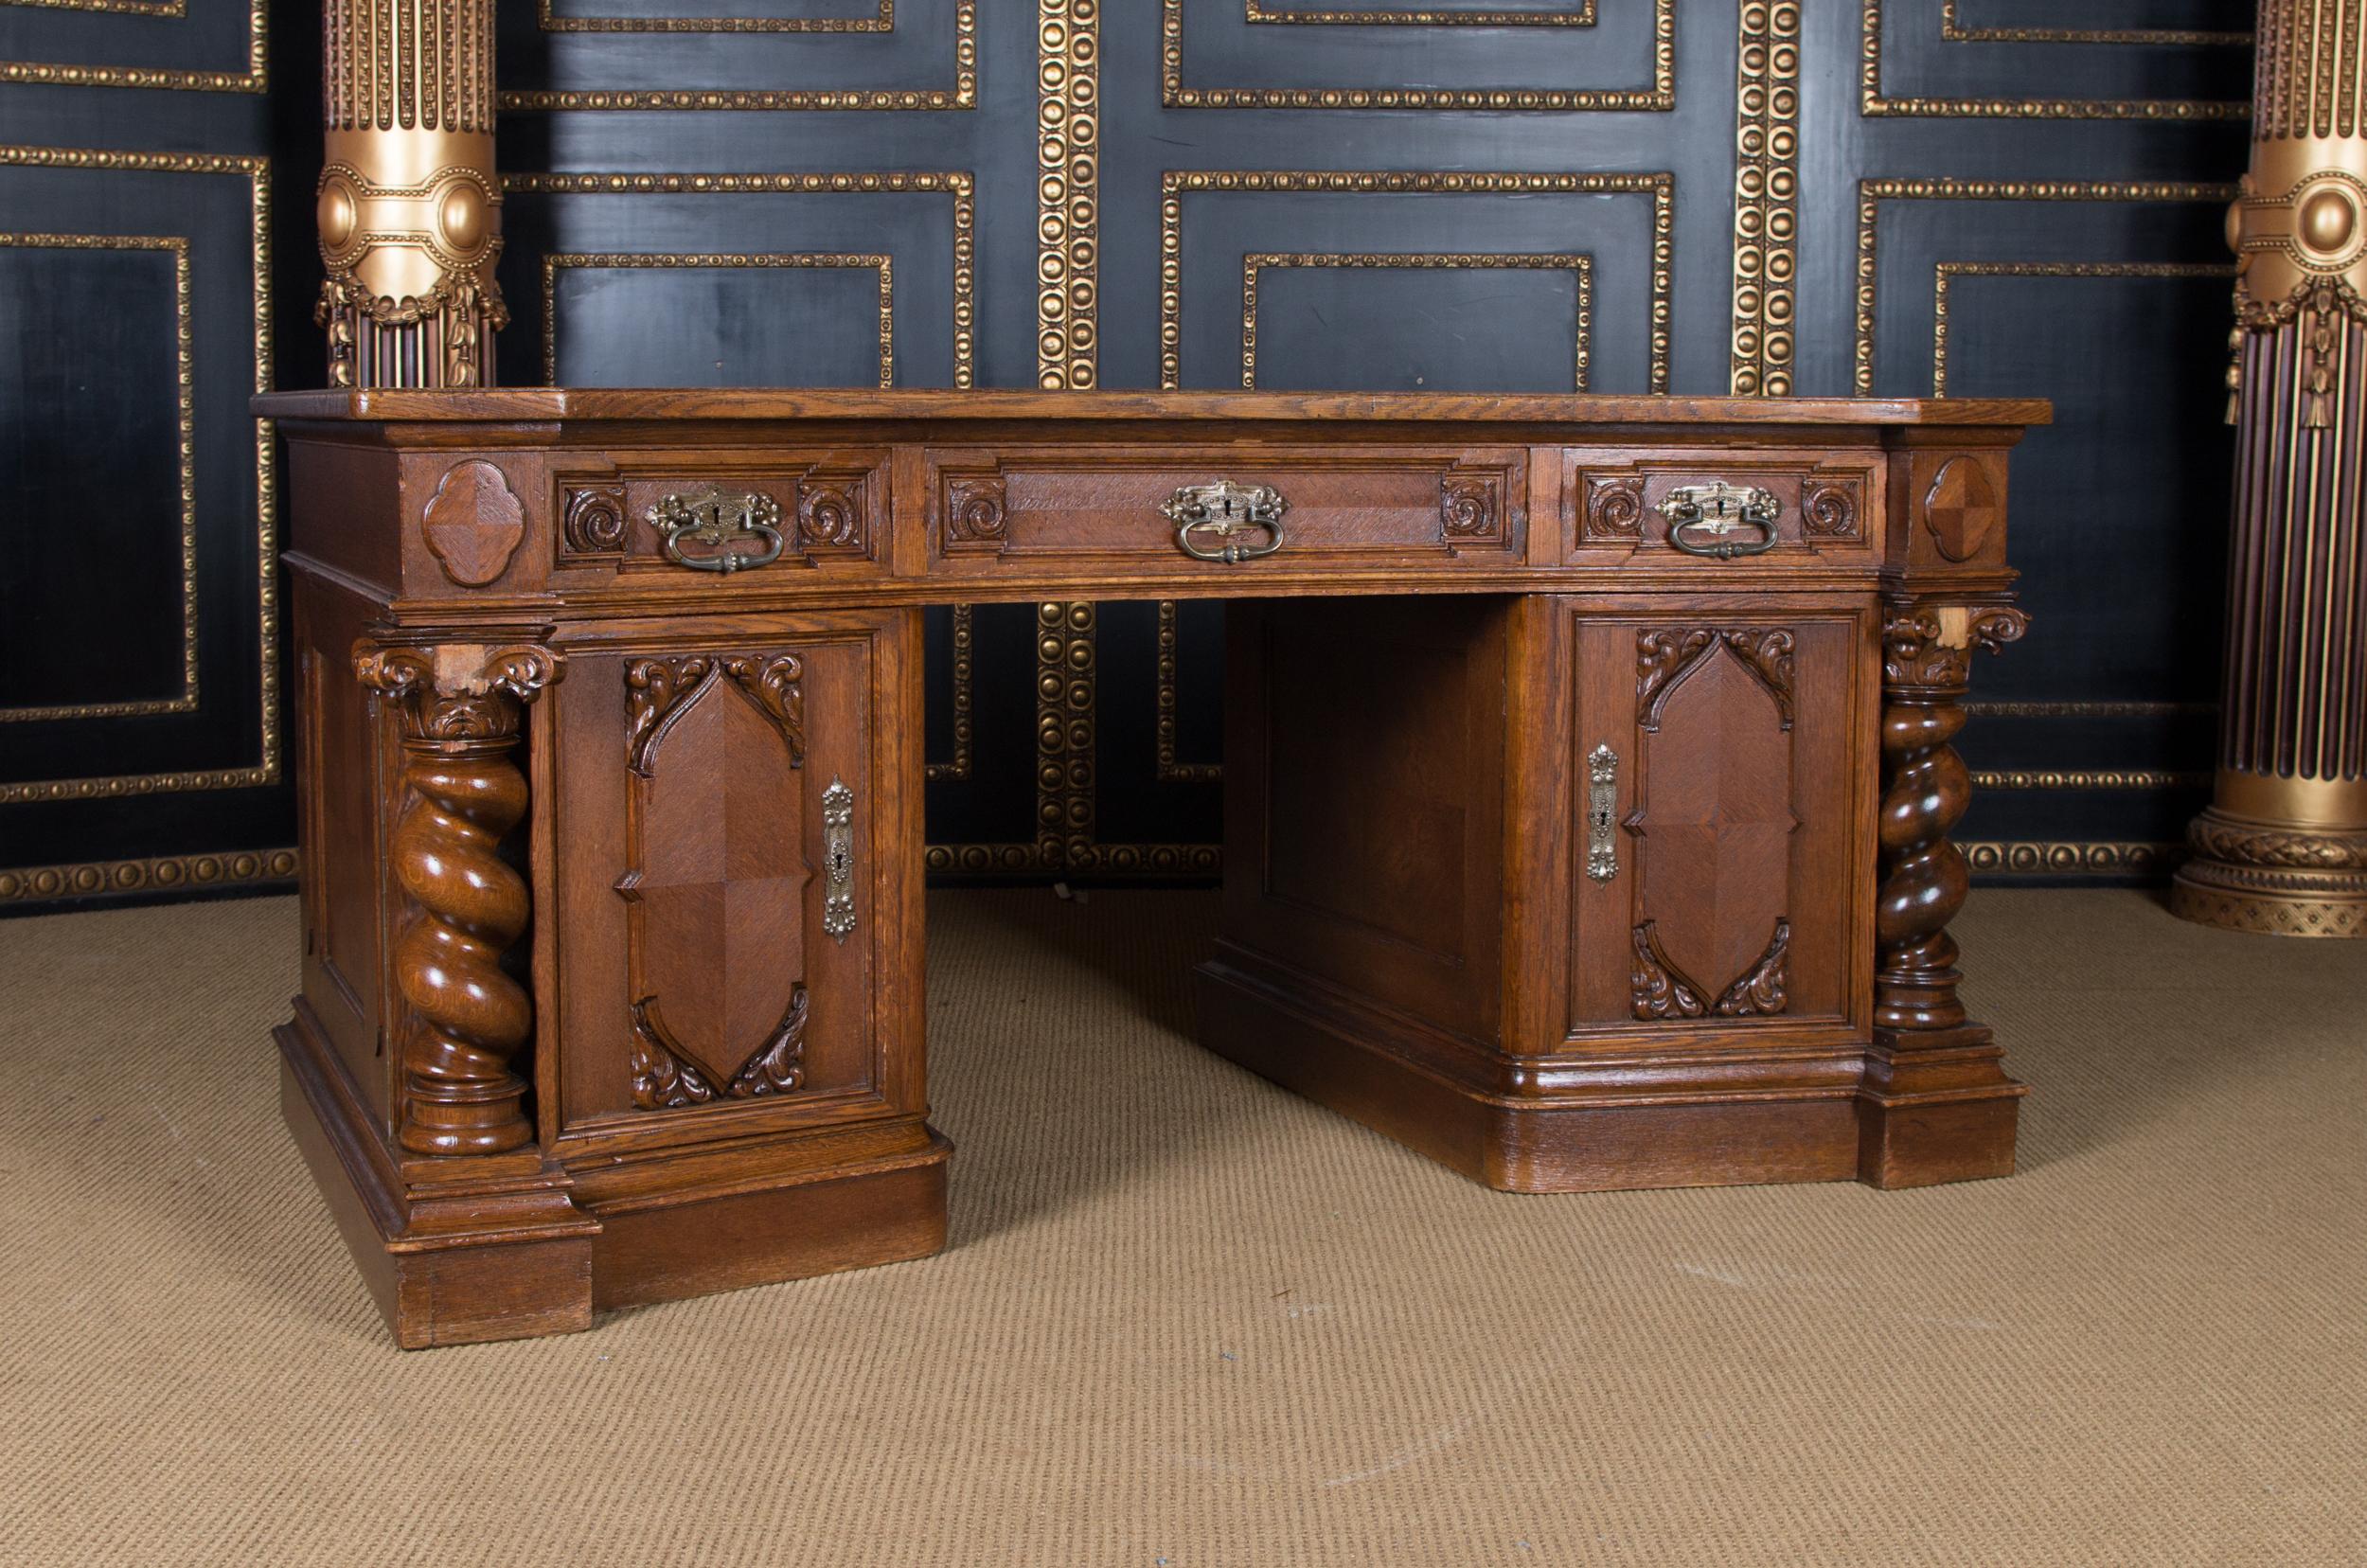 Castle worthy splendor desk Neo Renaissance circa 1860-1880 oak

Solid oak through and through. Straight body. Front high knee compartment with three different sized drawers. Two high doors with beautifully profiled panels flanked by spiral columns.